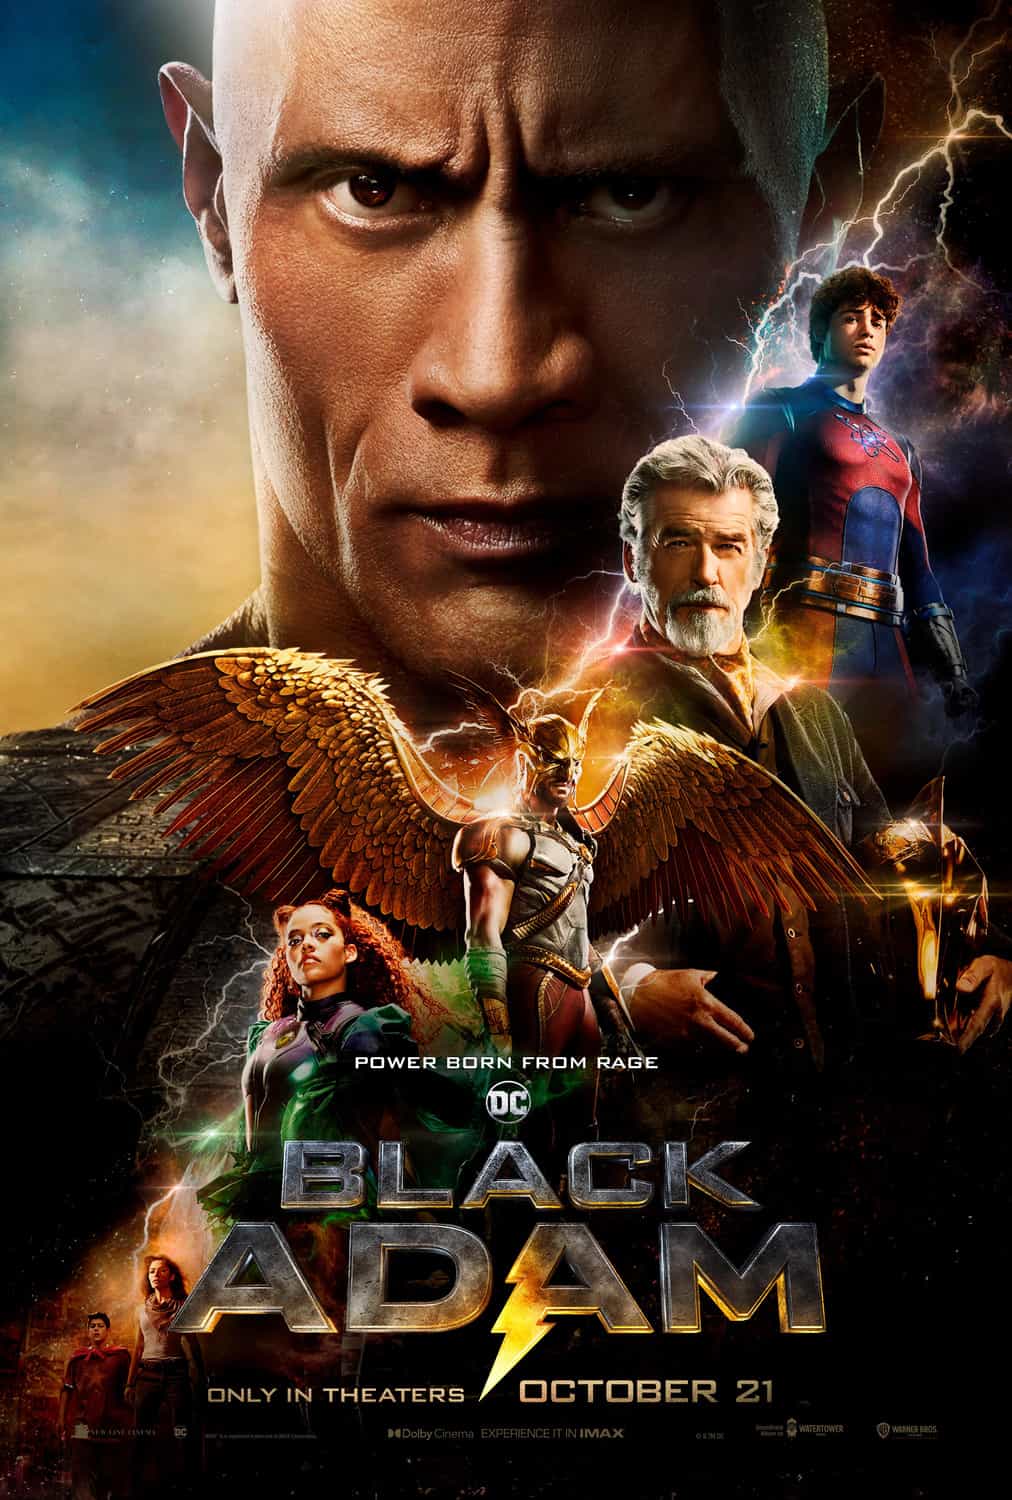 US Box Office Weekend Report 21st - 23rd October 2022: DC Universe movie Black Adam tops the US box office with a $67 Million debut